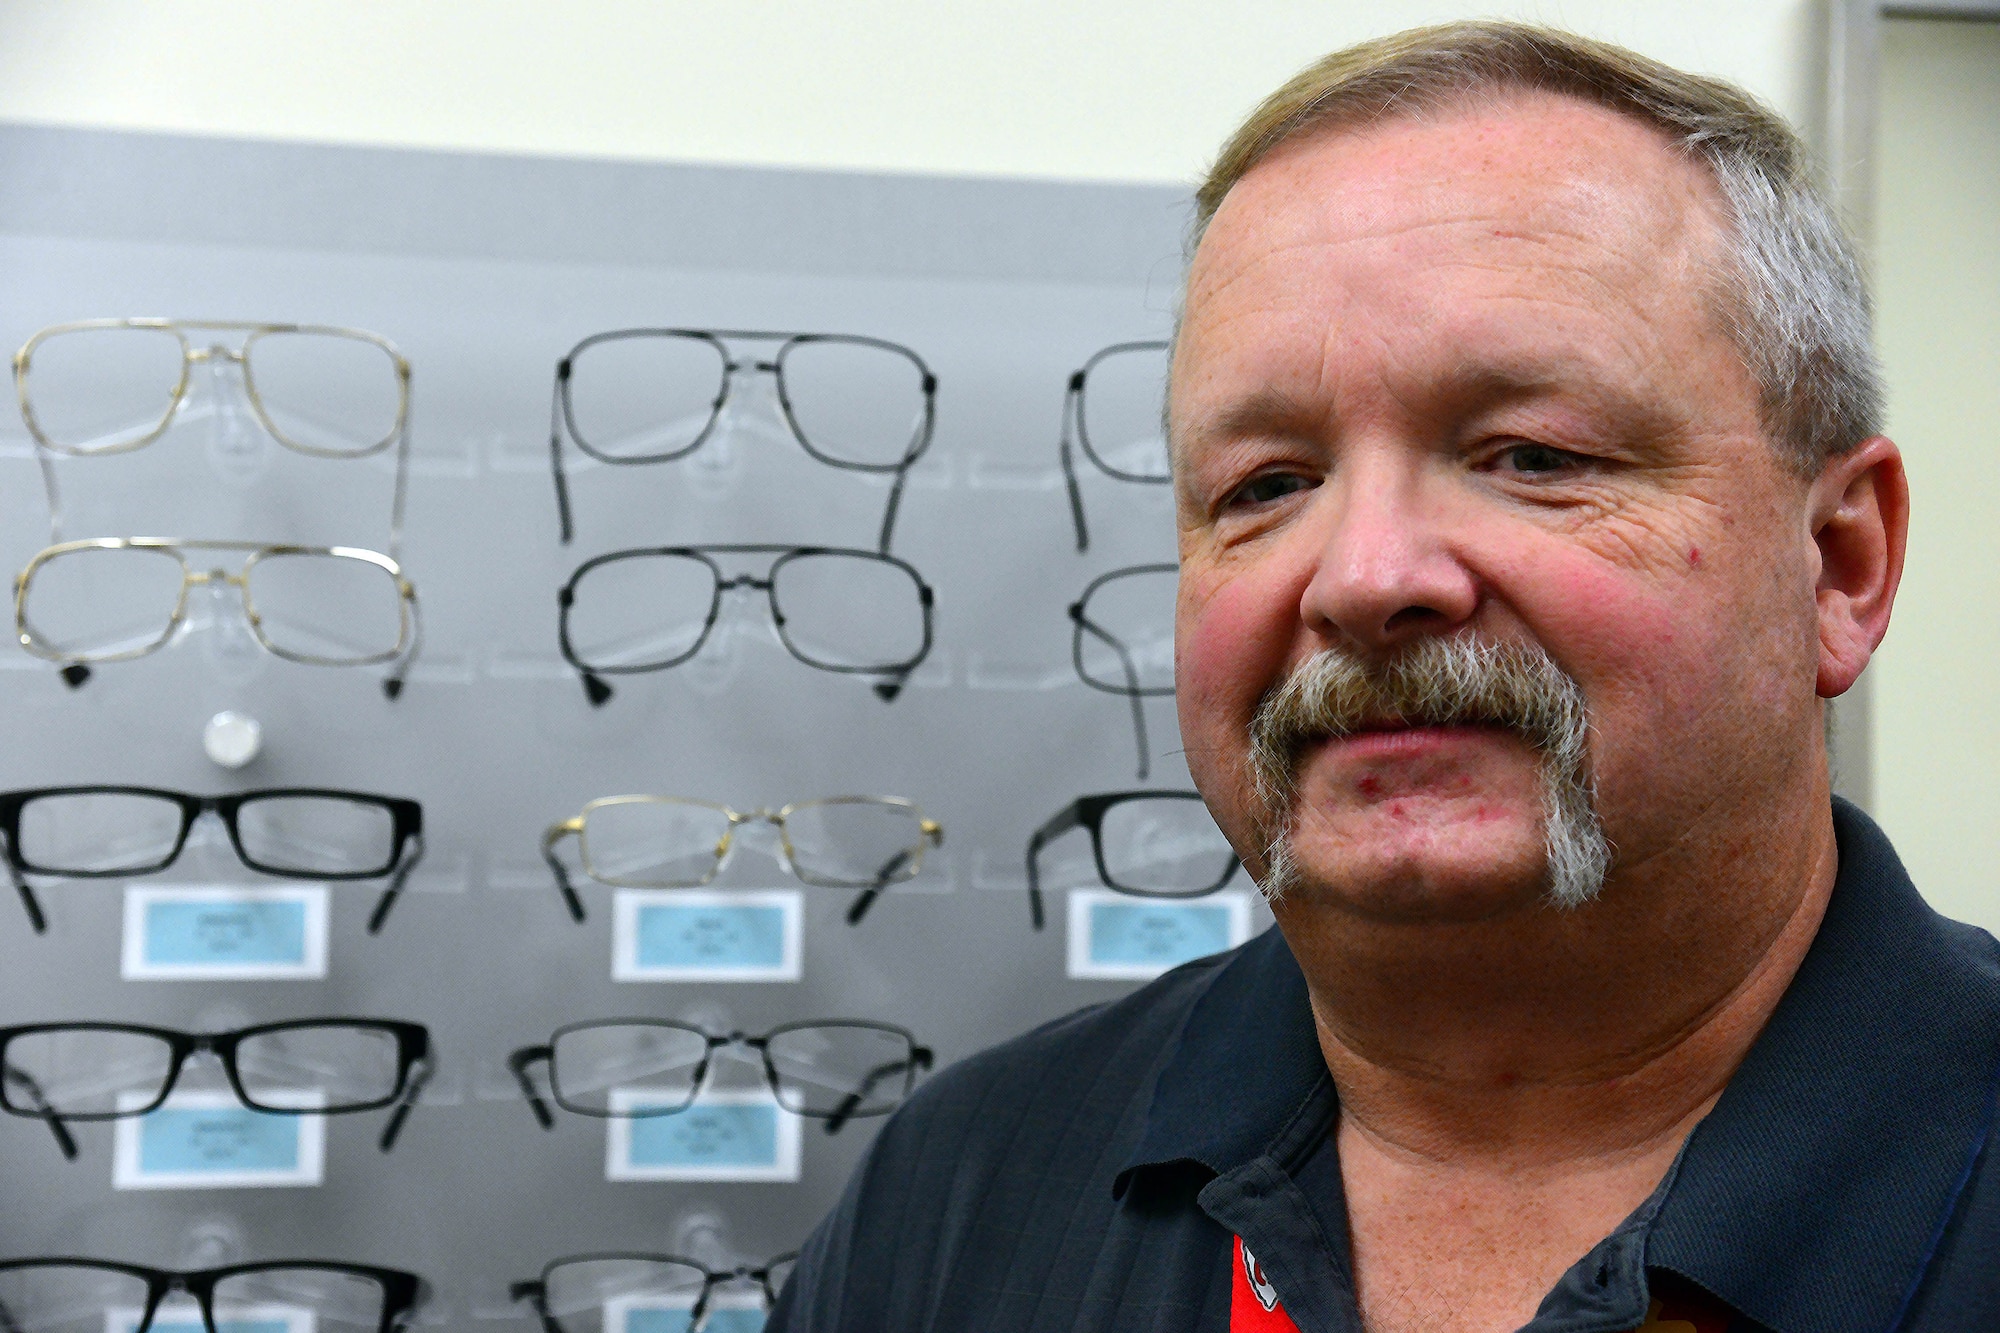 John Dresel, 341st Medical Operations Squadron optometry technician, poses for a photo in the optometry clinic Nov. 2, 2016, at Malmstrom Air Force Base, Mont. Dresel recently received the Civilian Category 1 award for the third quarter partly due to his outstanding customer service. (U.S. Air Force photo/Airman 1st Class Magen M. Reeves)